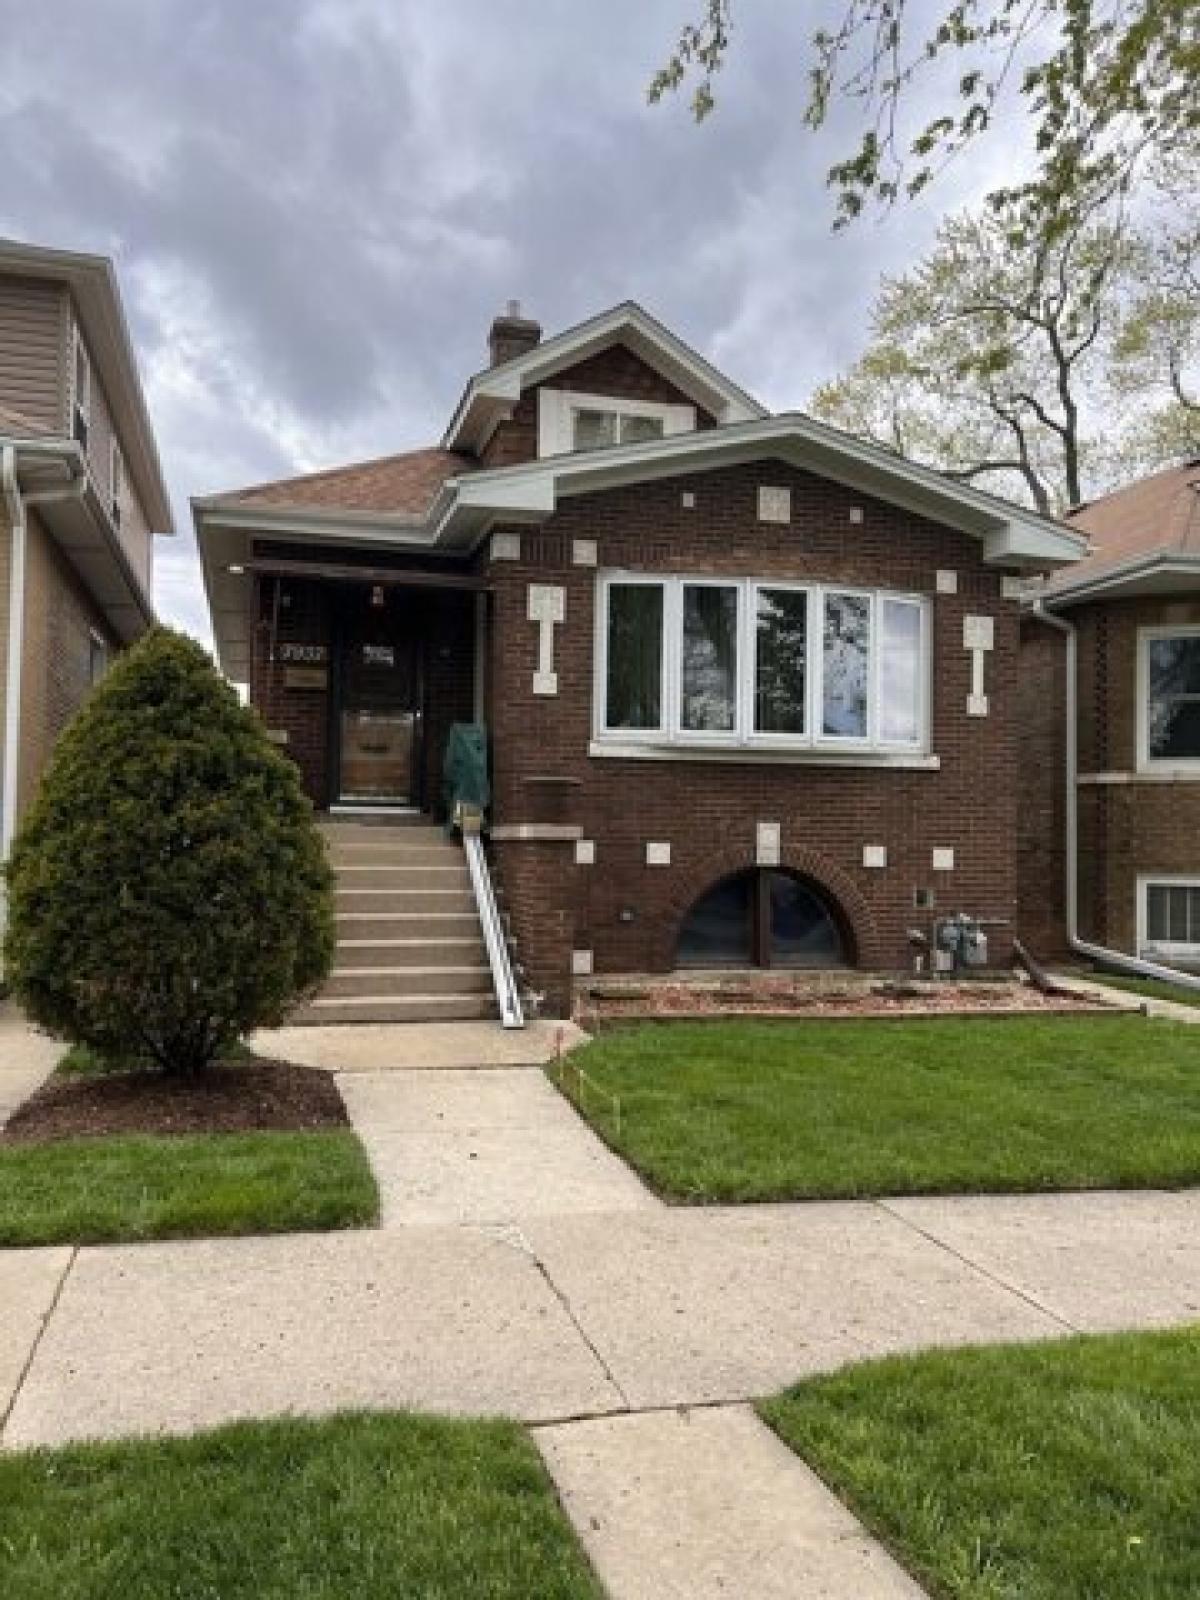 Picture of Home For Sale in Elmwood Park, Illinois, United States